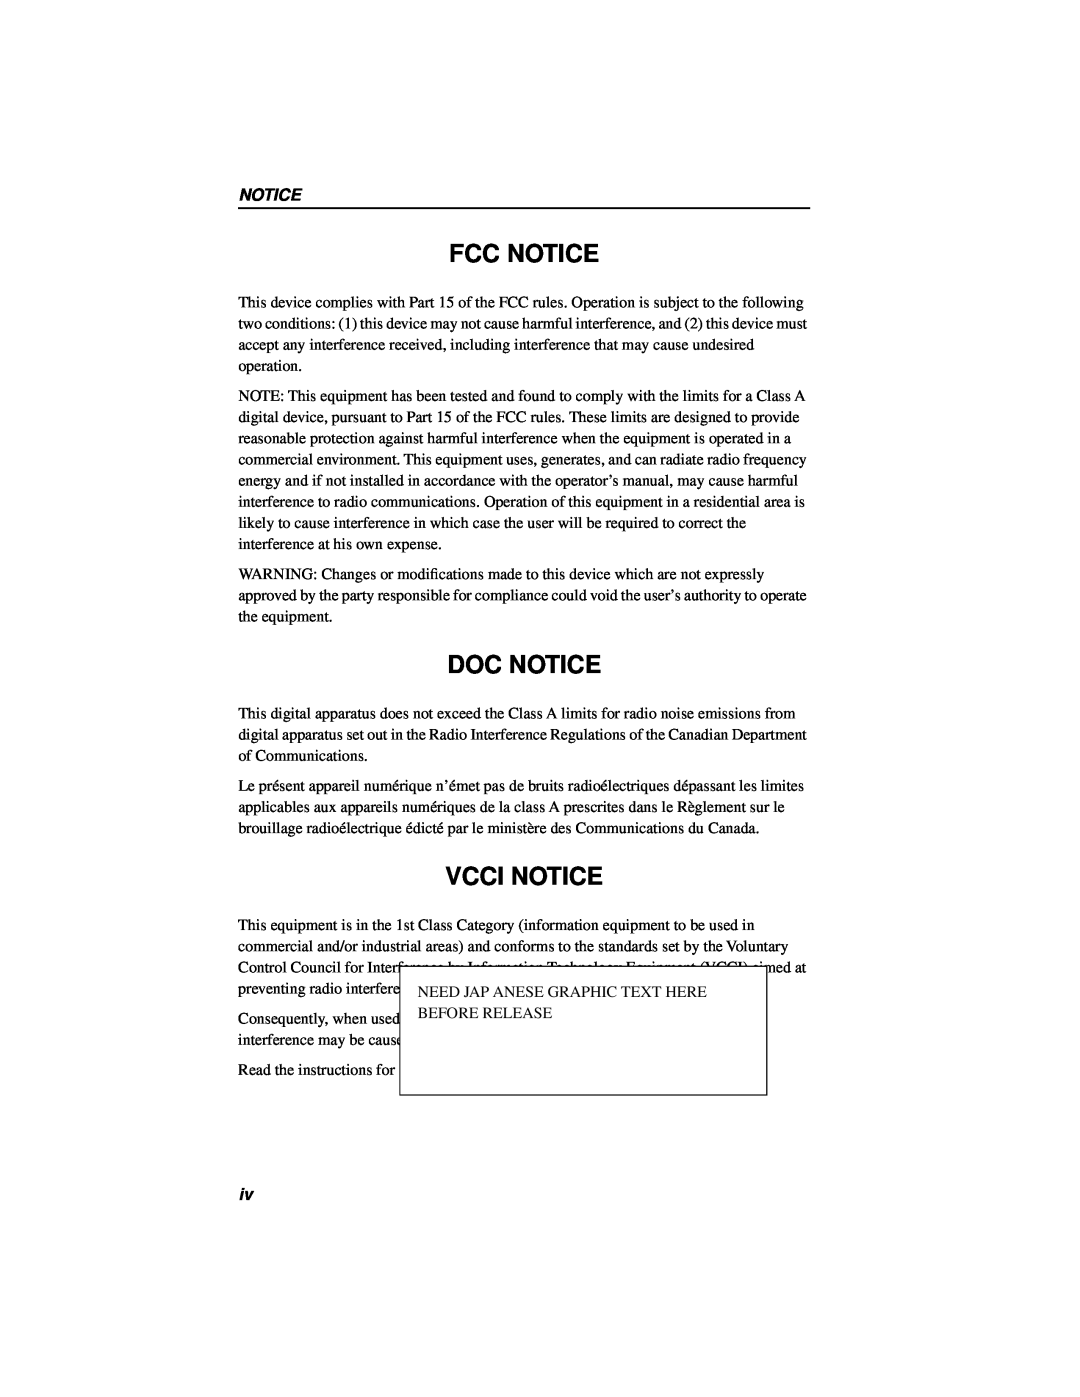 Cabletron Systems MICROMMAC-22T, 42T manual Fcc Notice, Doc Notice, Vcci Notice 